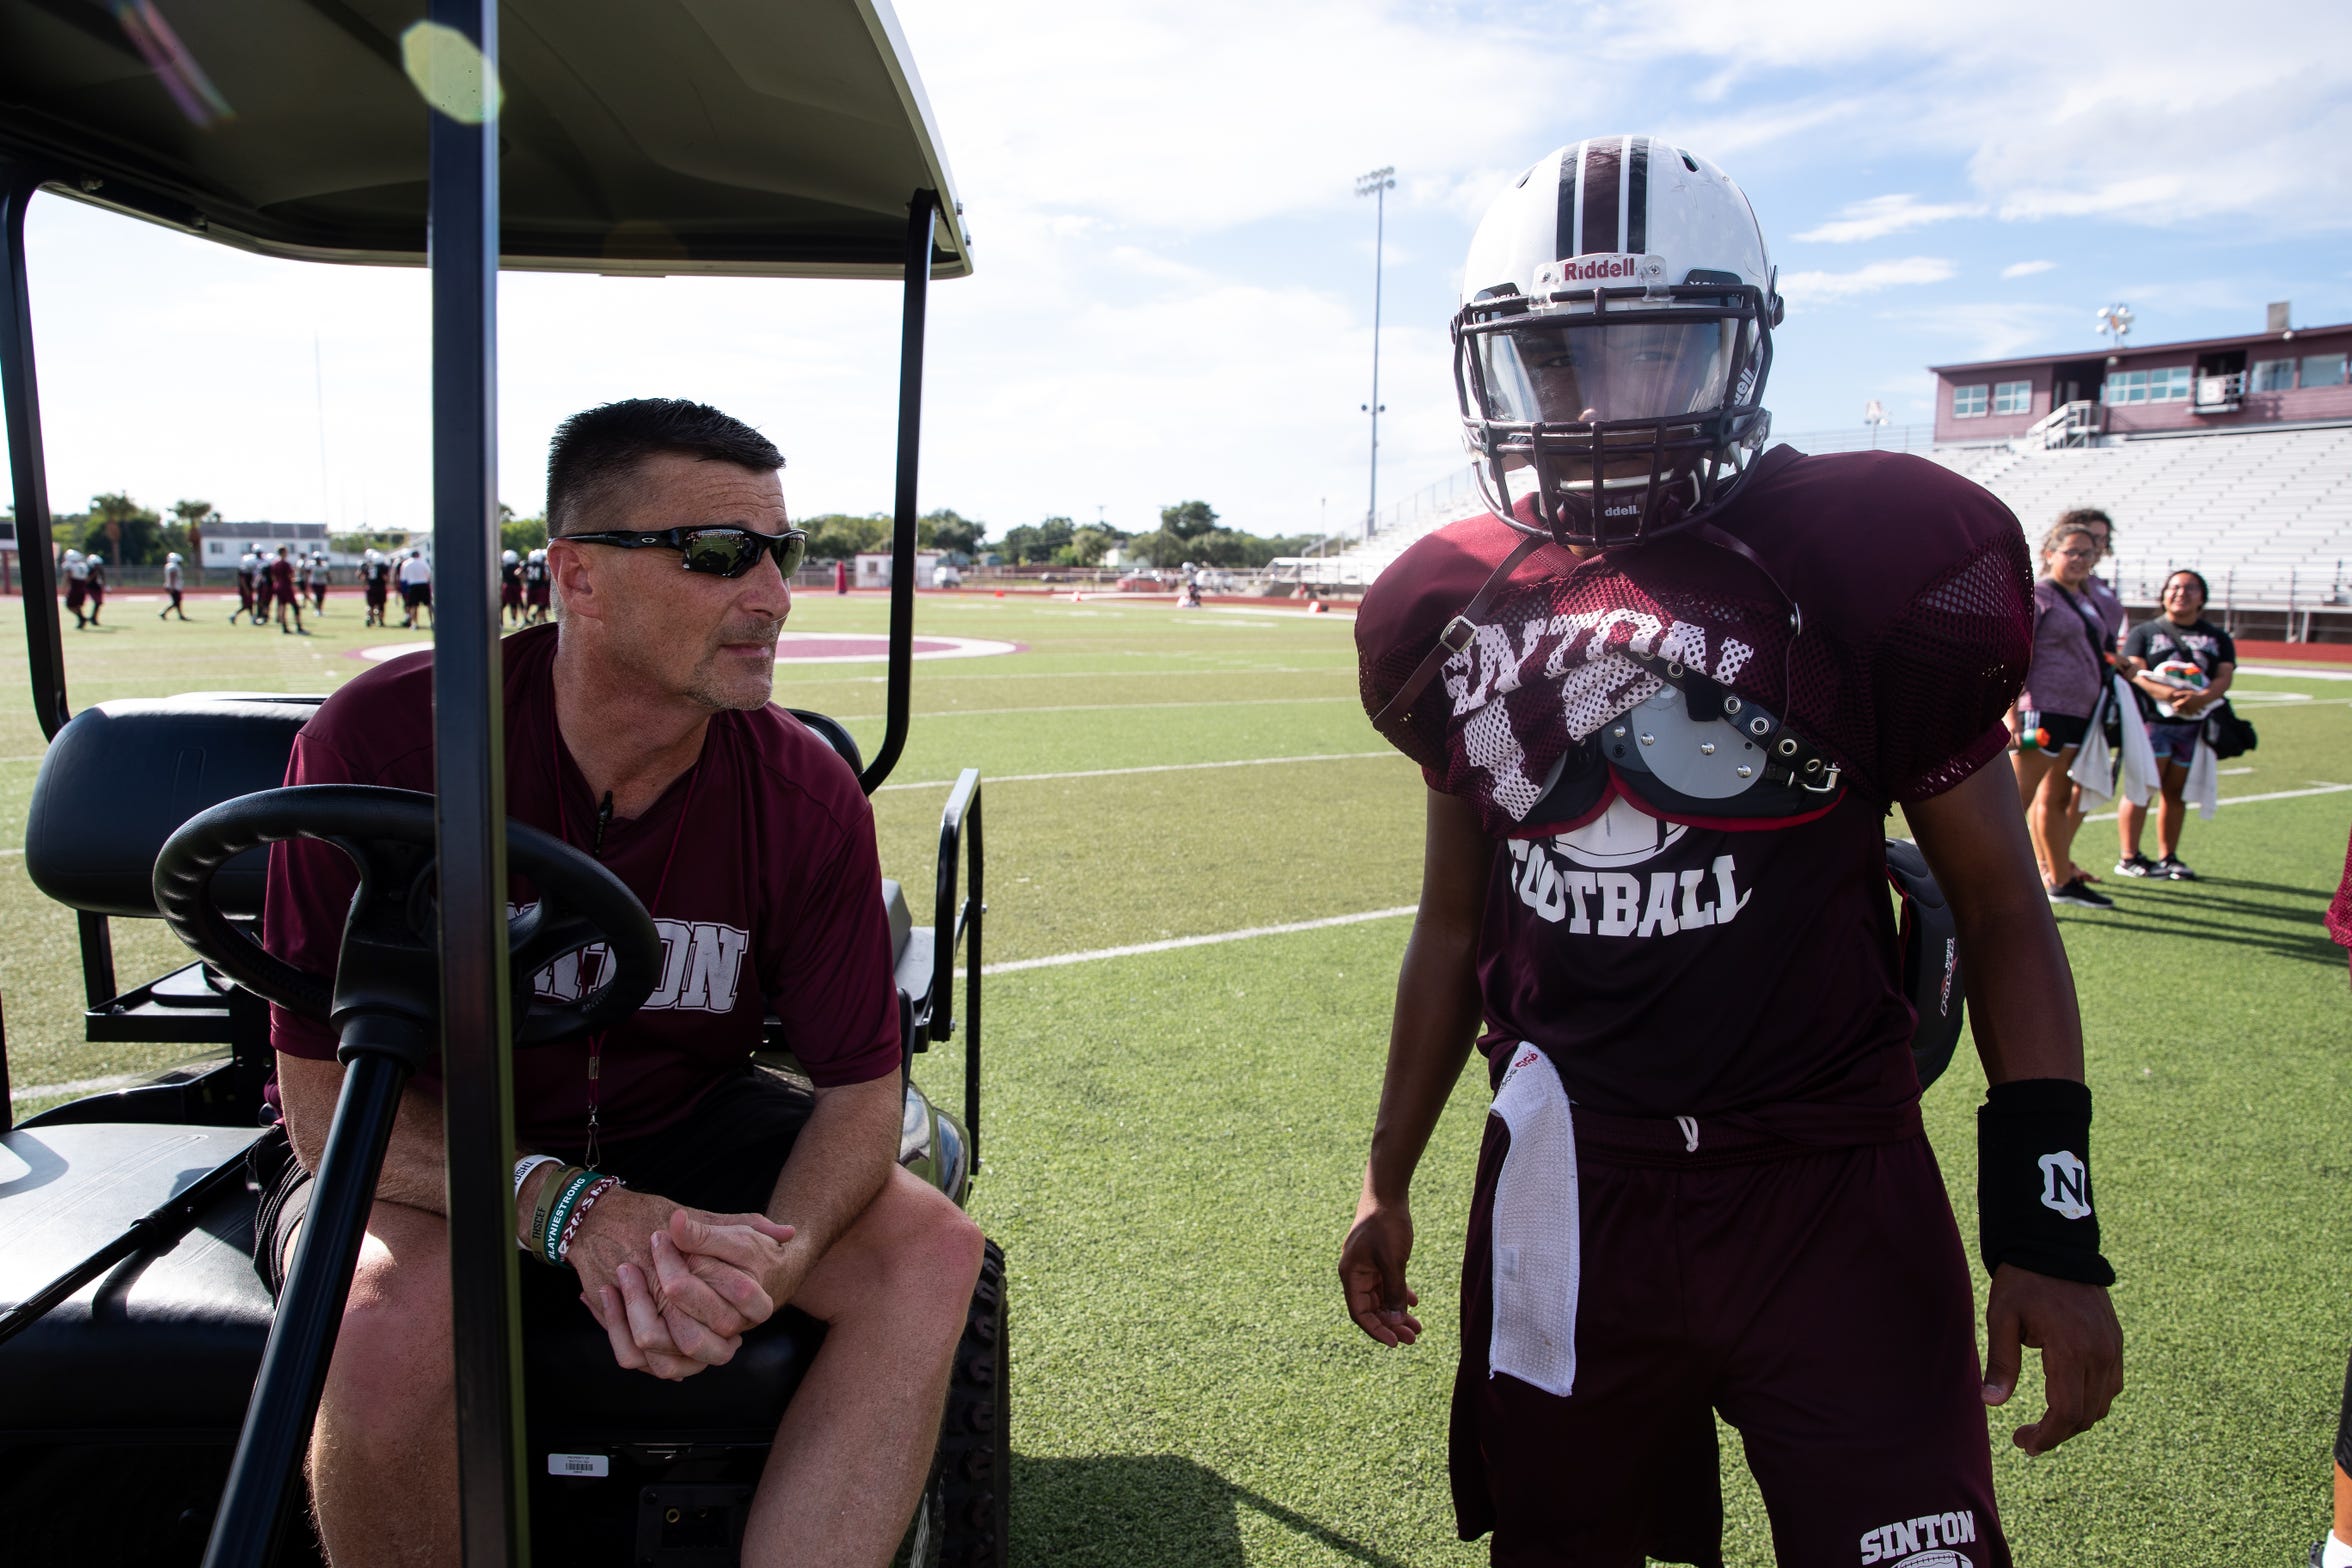 Tom Allen head coach of the Sinton football team talks to one of his players as he sits in his cart during practice at Sinton High School on Tuesday, Sept. 18, 2018. Allen is suffering from a rare neurological disease that has him in a cart during games and practices